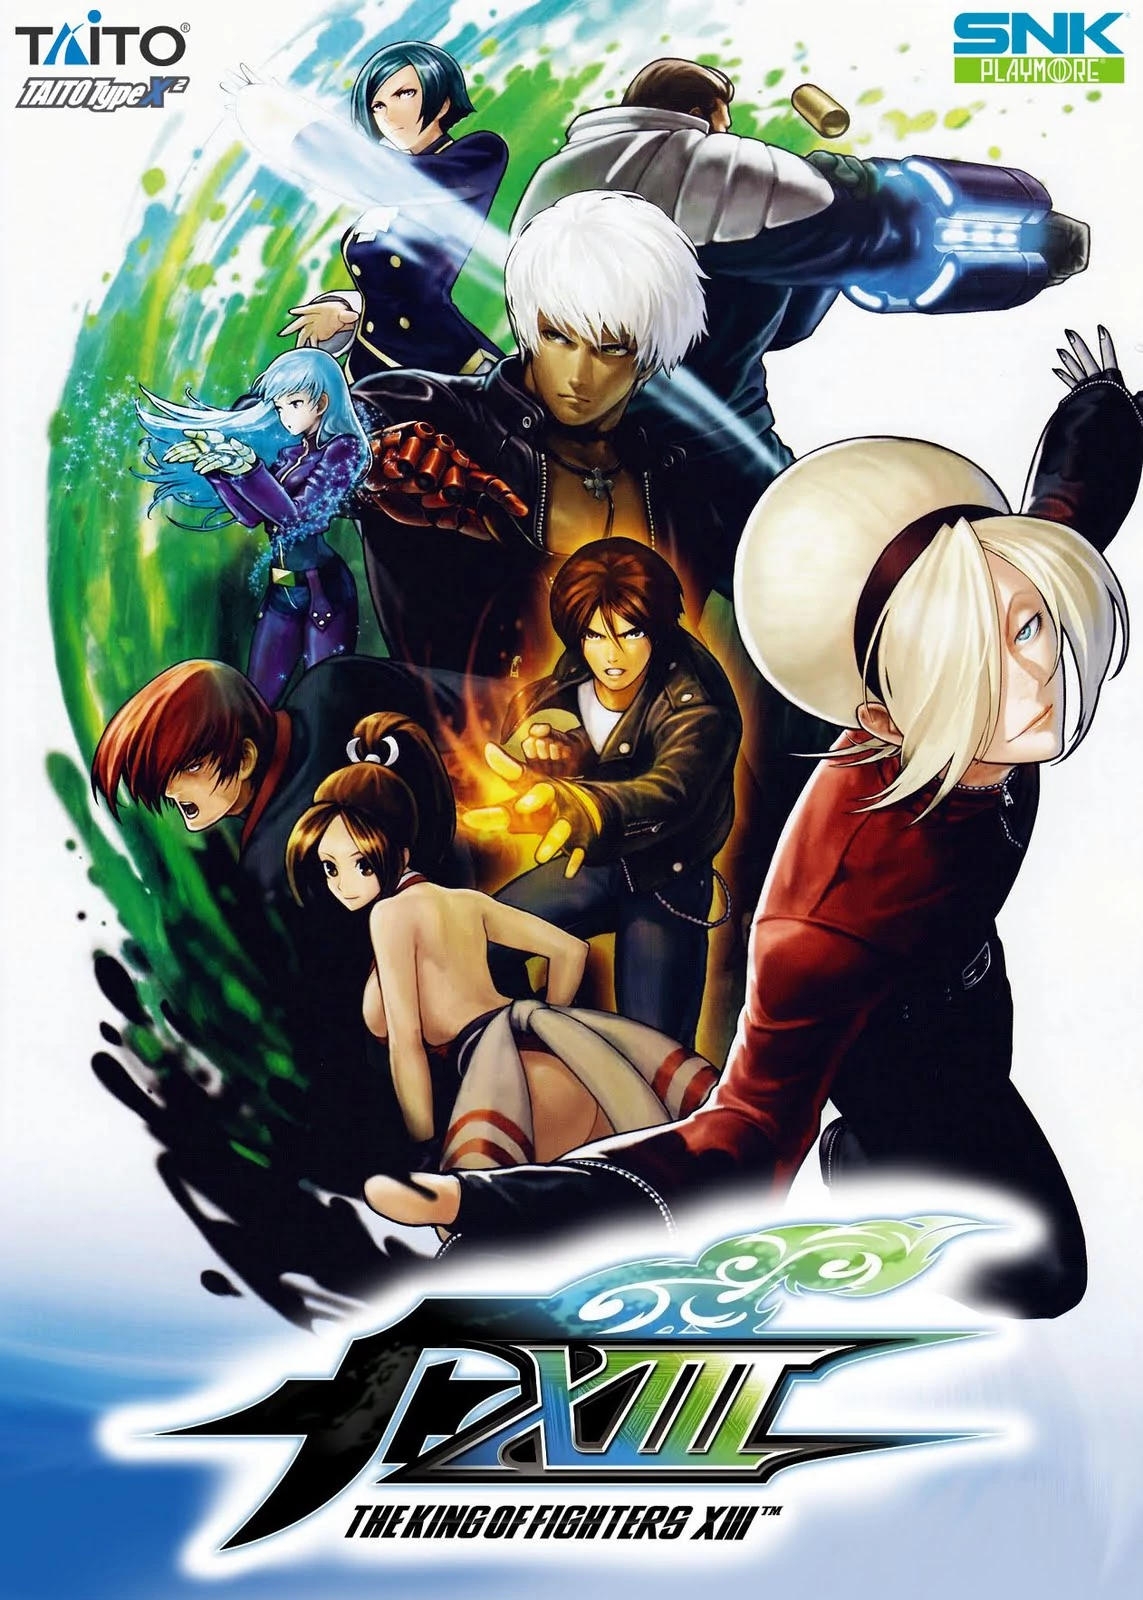 Capa do jogo The King of Fighters XIII